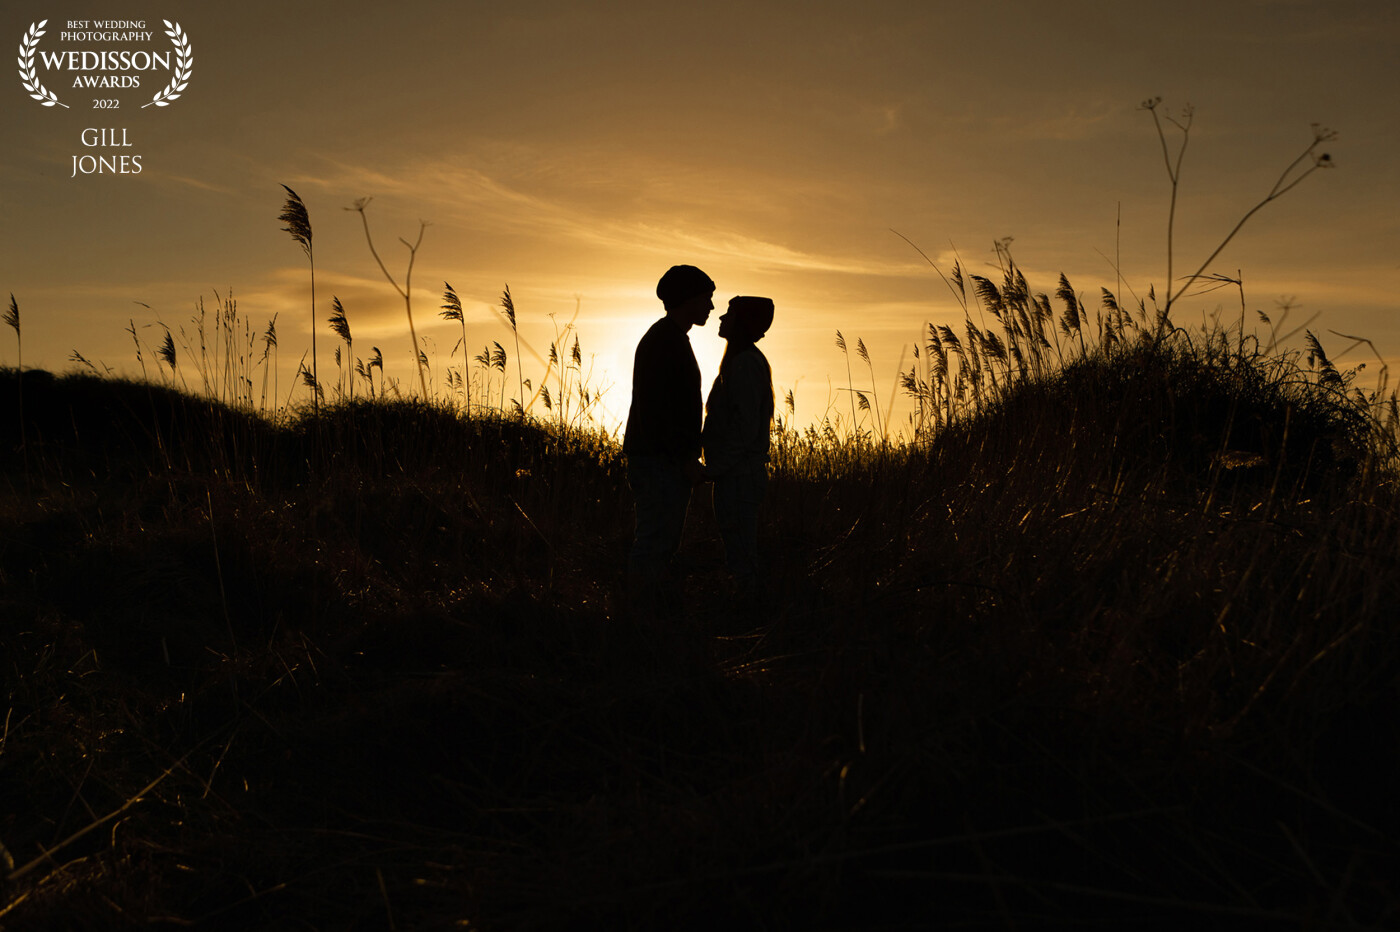 A fabulous  sunset 4.45pm in January for Tom and Evie's pre-wed shoot on the Isle of Anglesey, North Wales. Negotiating the marsh area, inching closer towards the Crigyll river we managed to capture this magical shot.